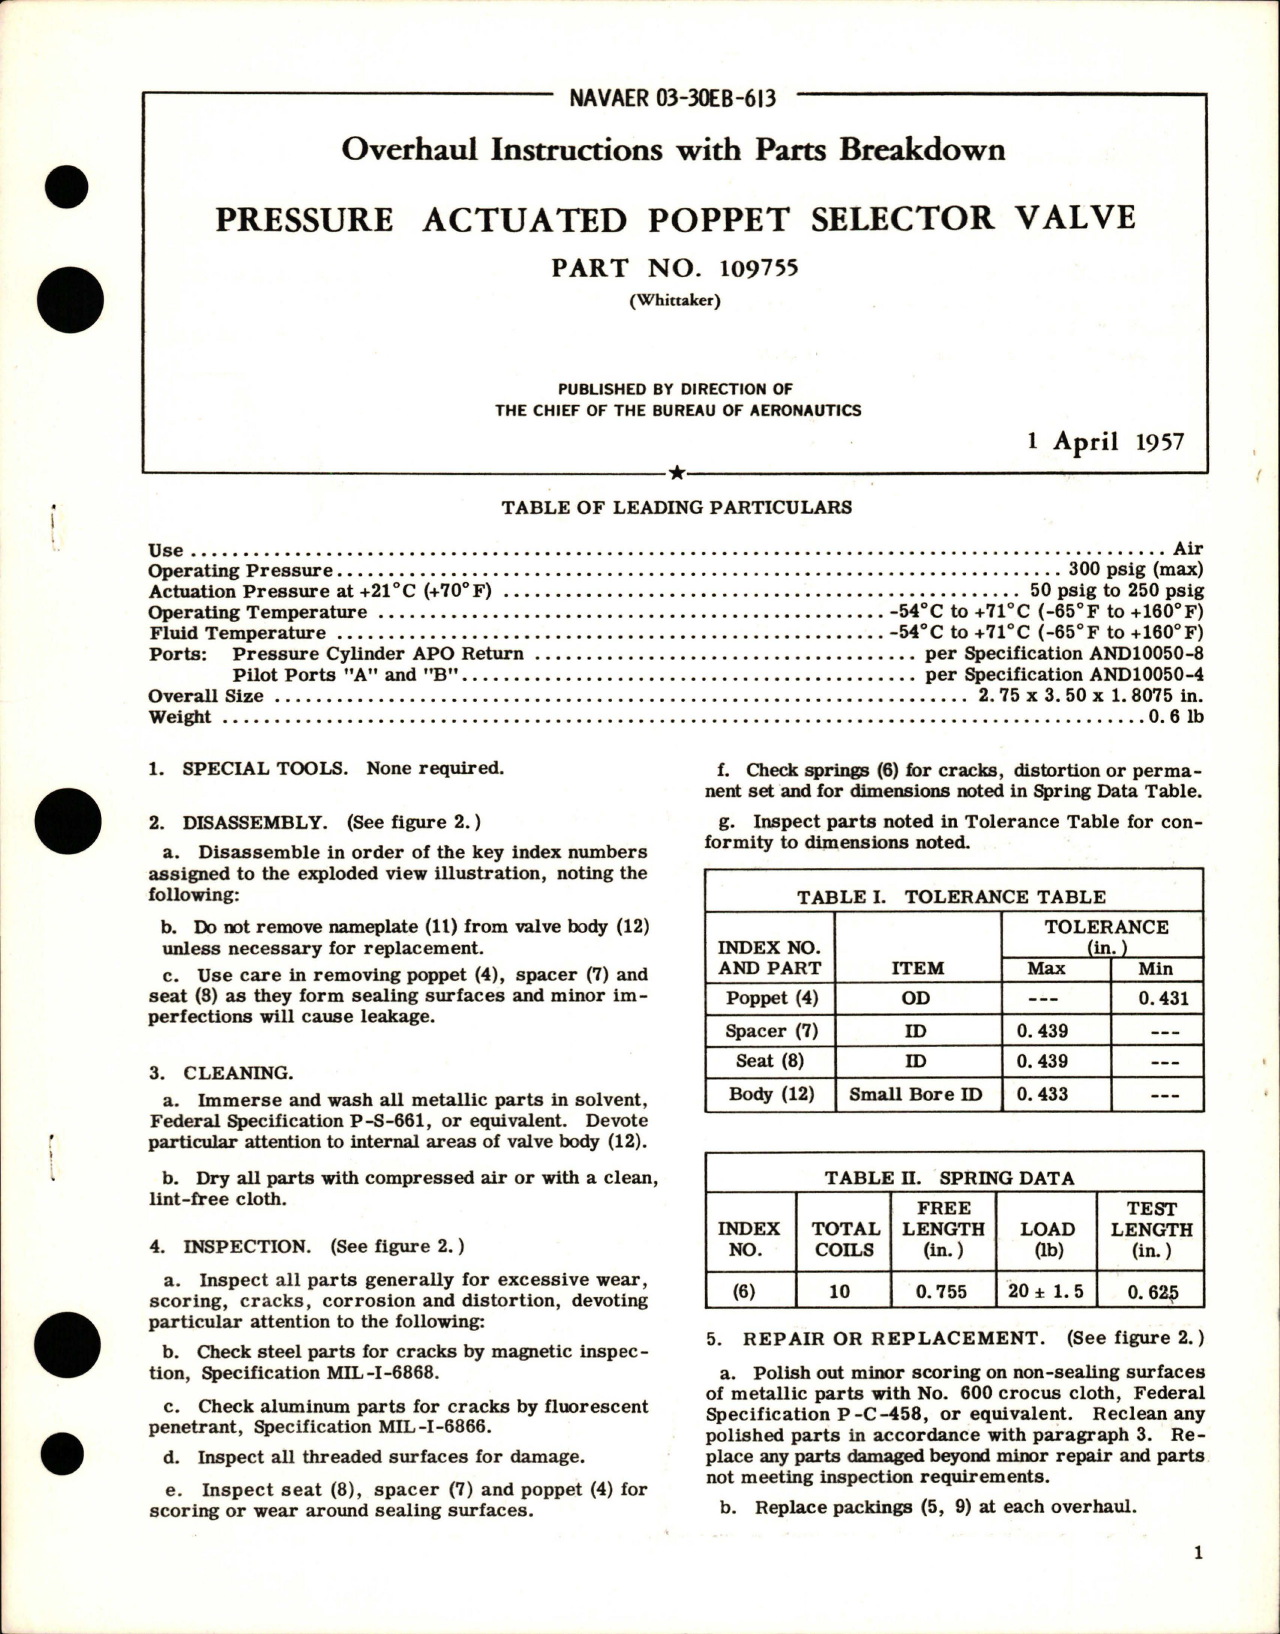 Sample page 1 from AirCorps Library document: Overhaul Instructions with Parts Breakdown for Pressure Actuated Poppet Selector Valve - Part 109755